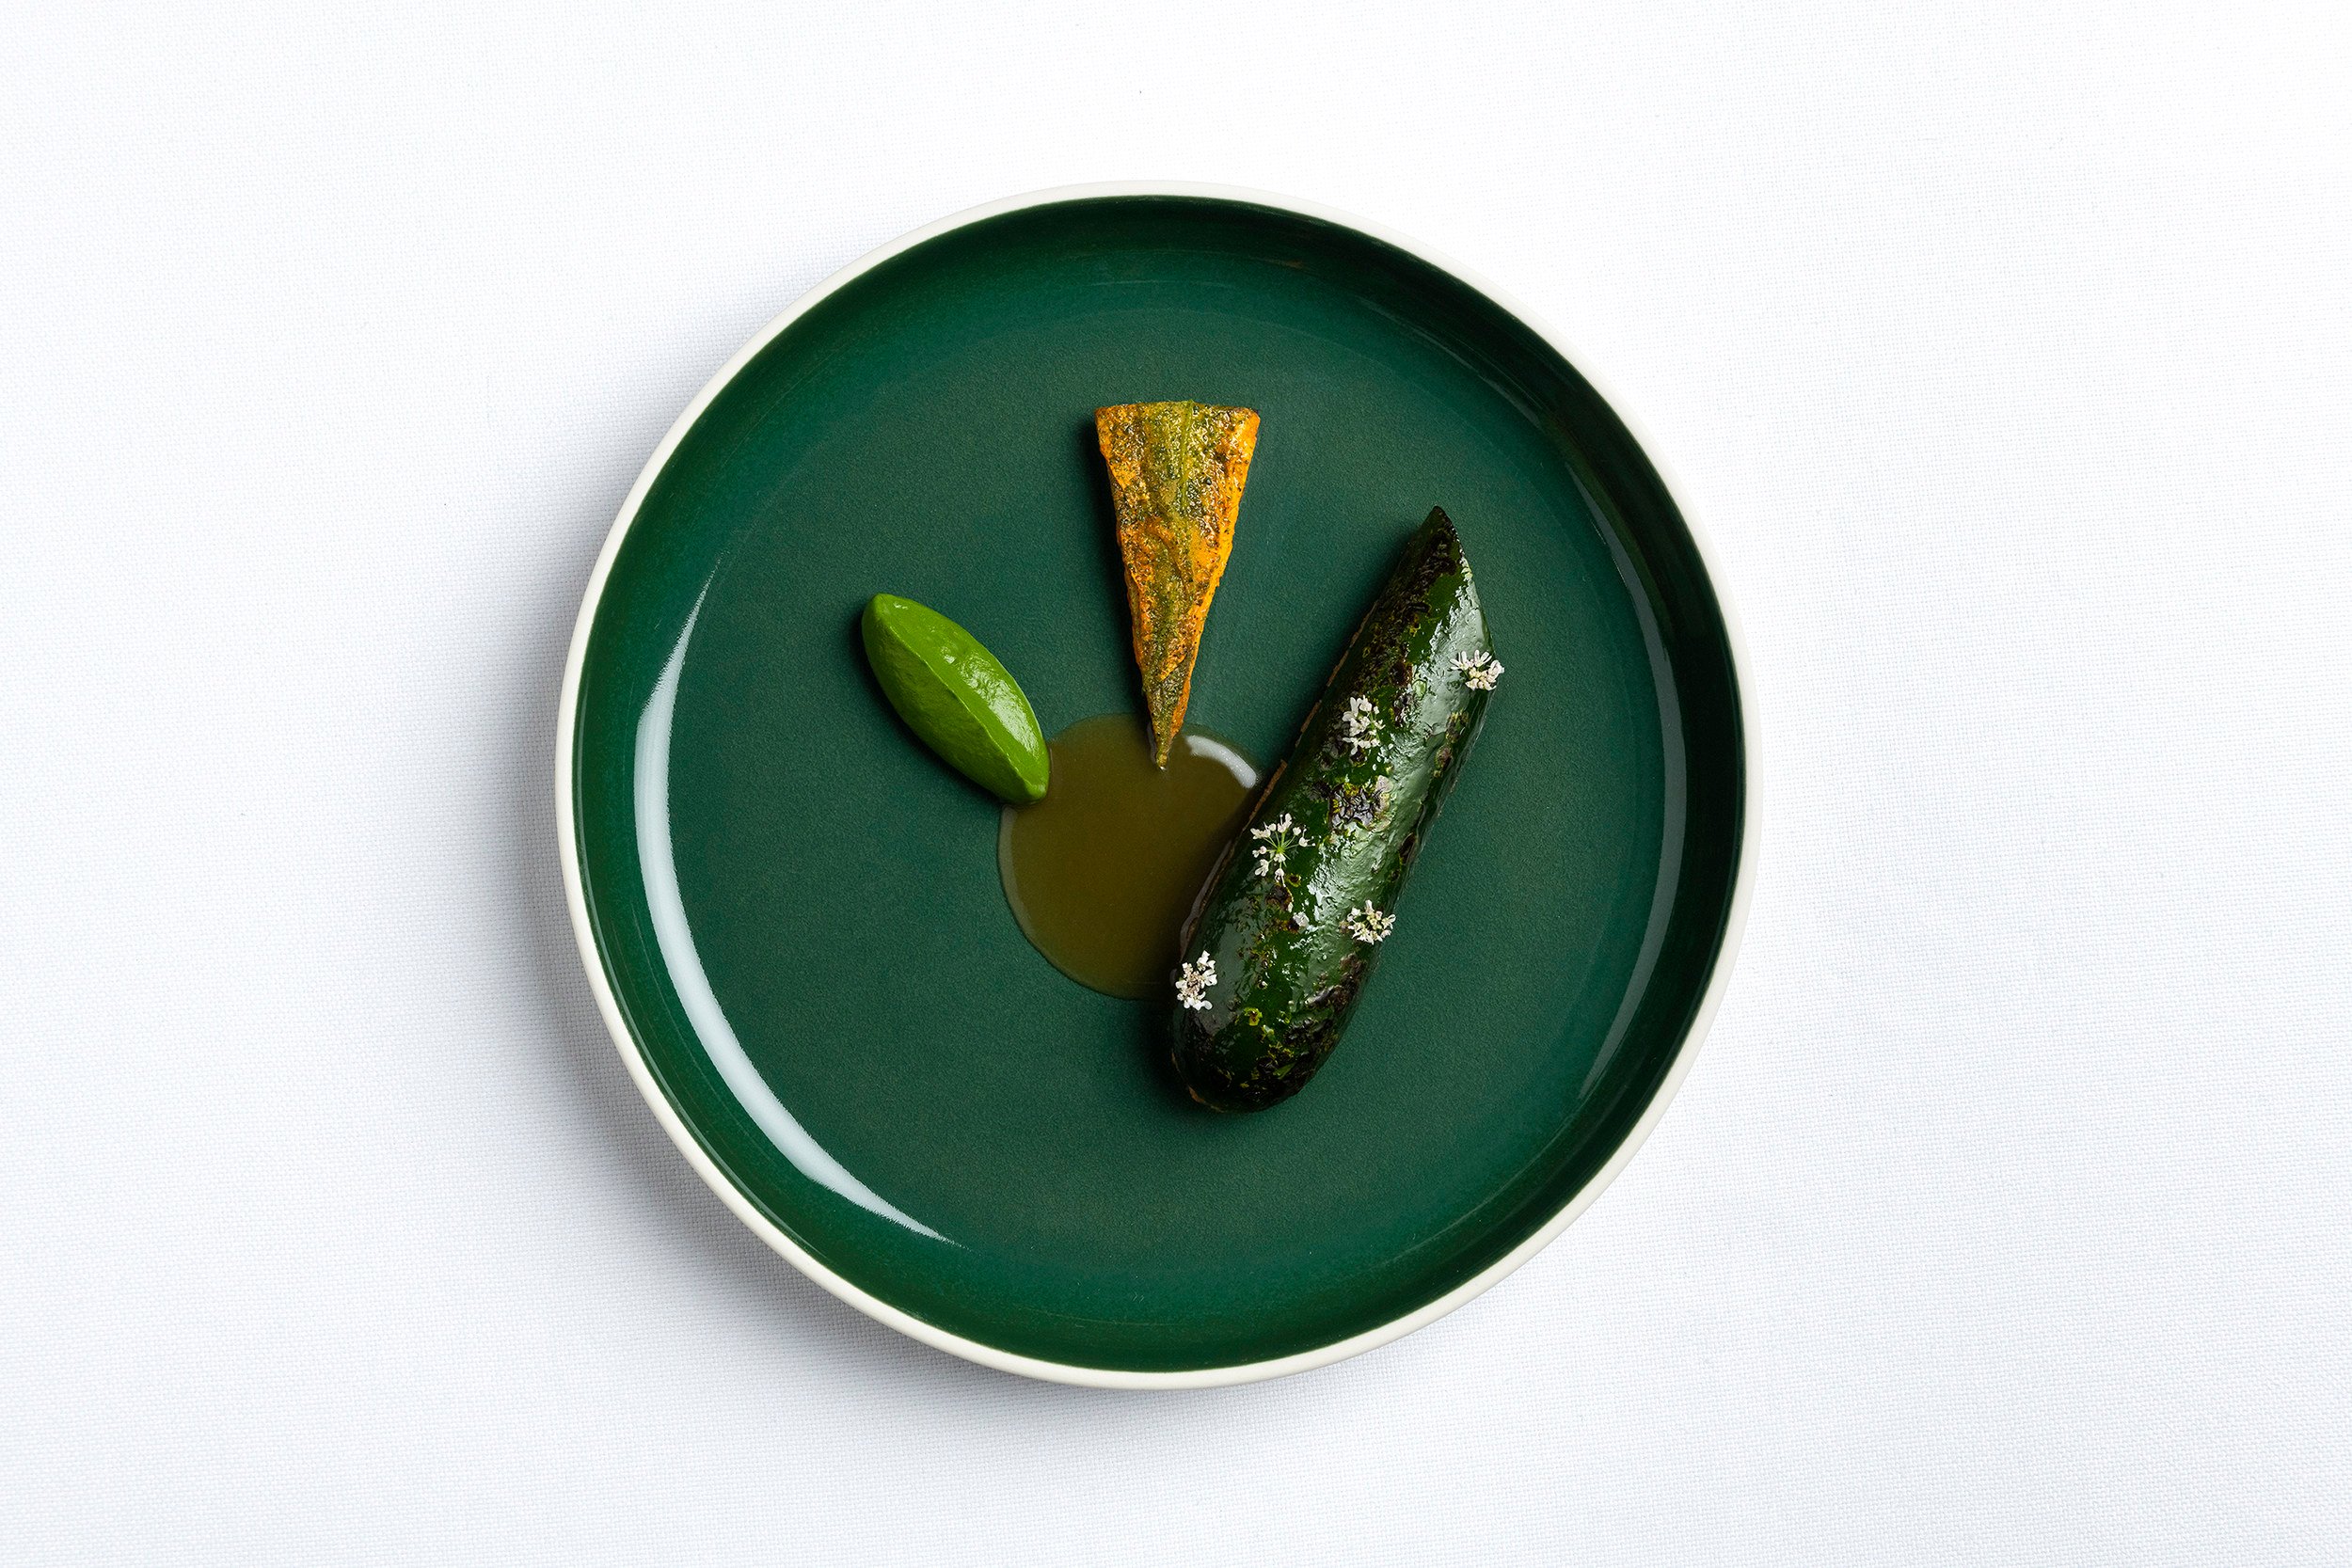 Eleven Madison Park’s collaboration with Rosewood Hong Kong’s Asaya Kitchen from November 14 to 18 includes dishes such as summer squash with poblano pepper (above). Photo: Evan Sung